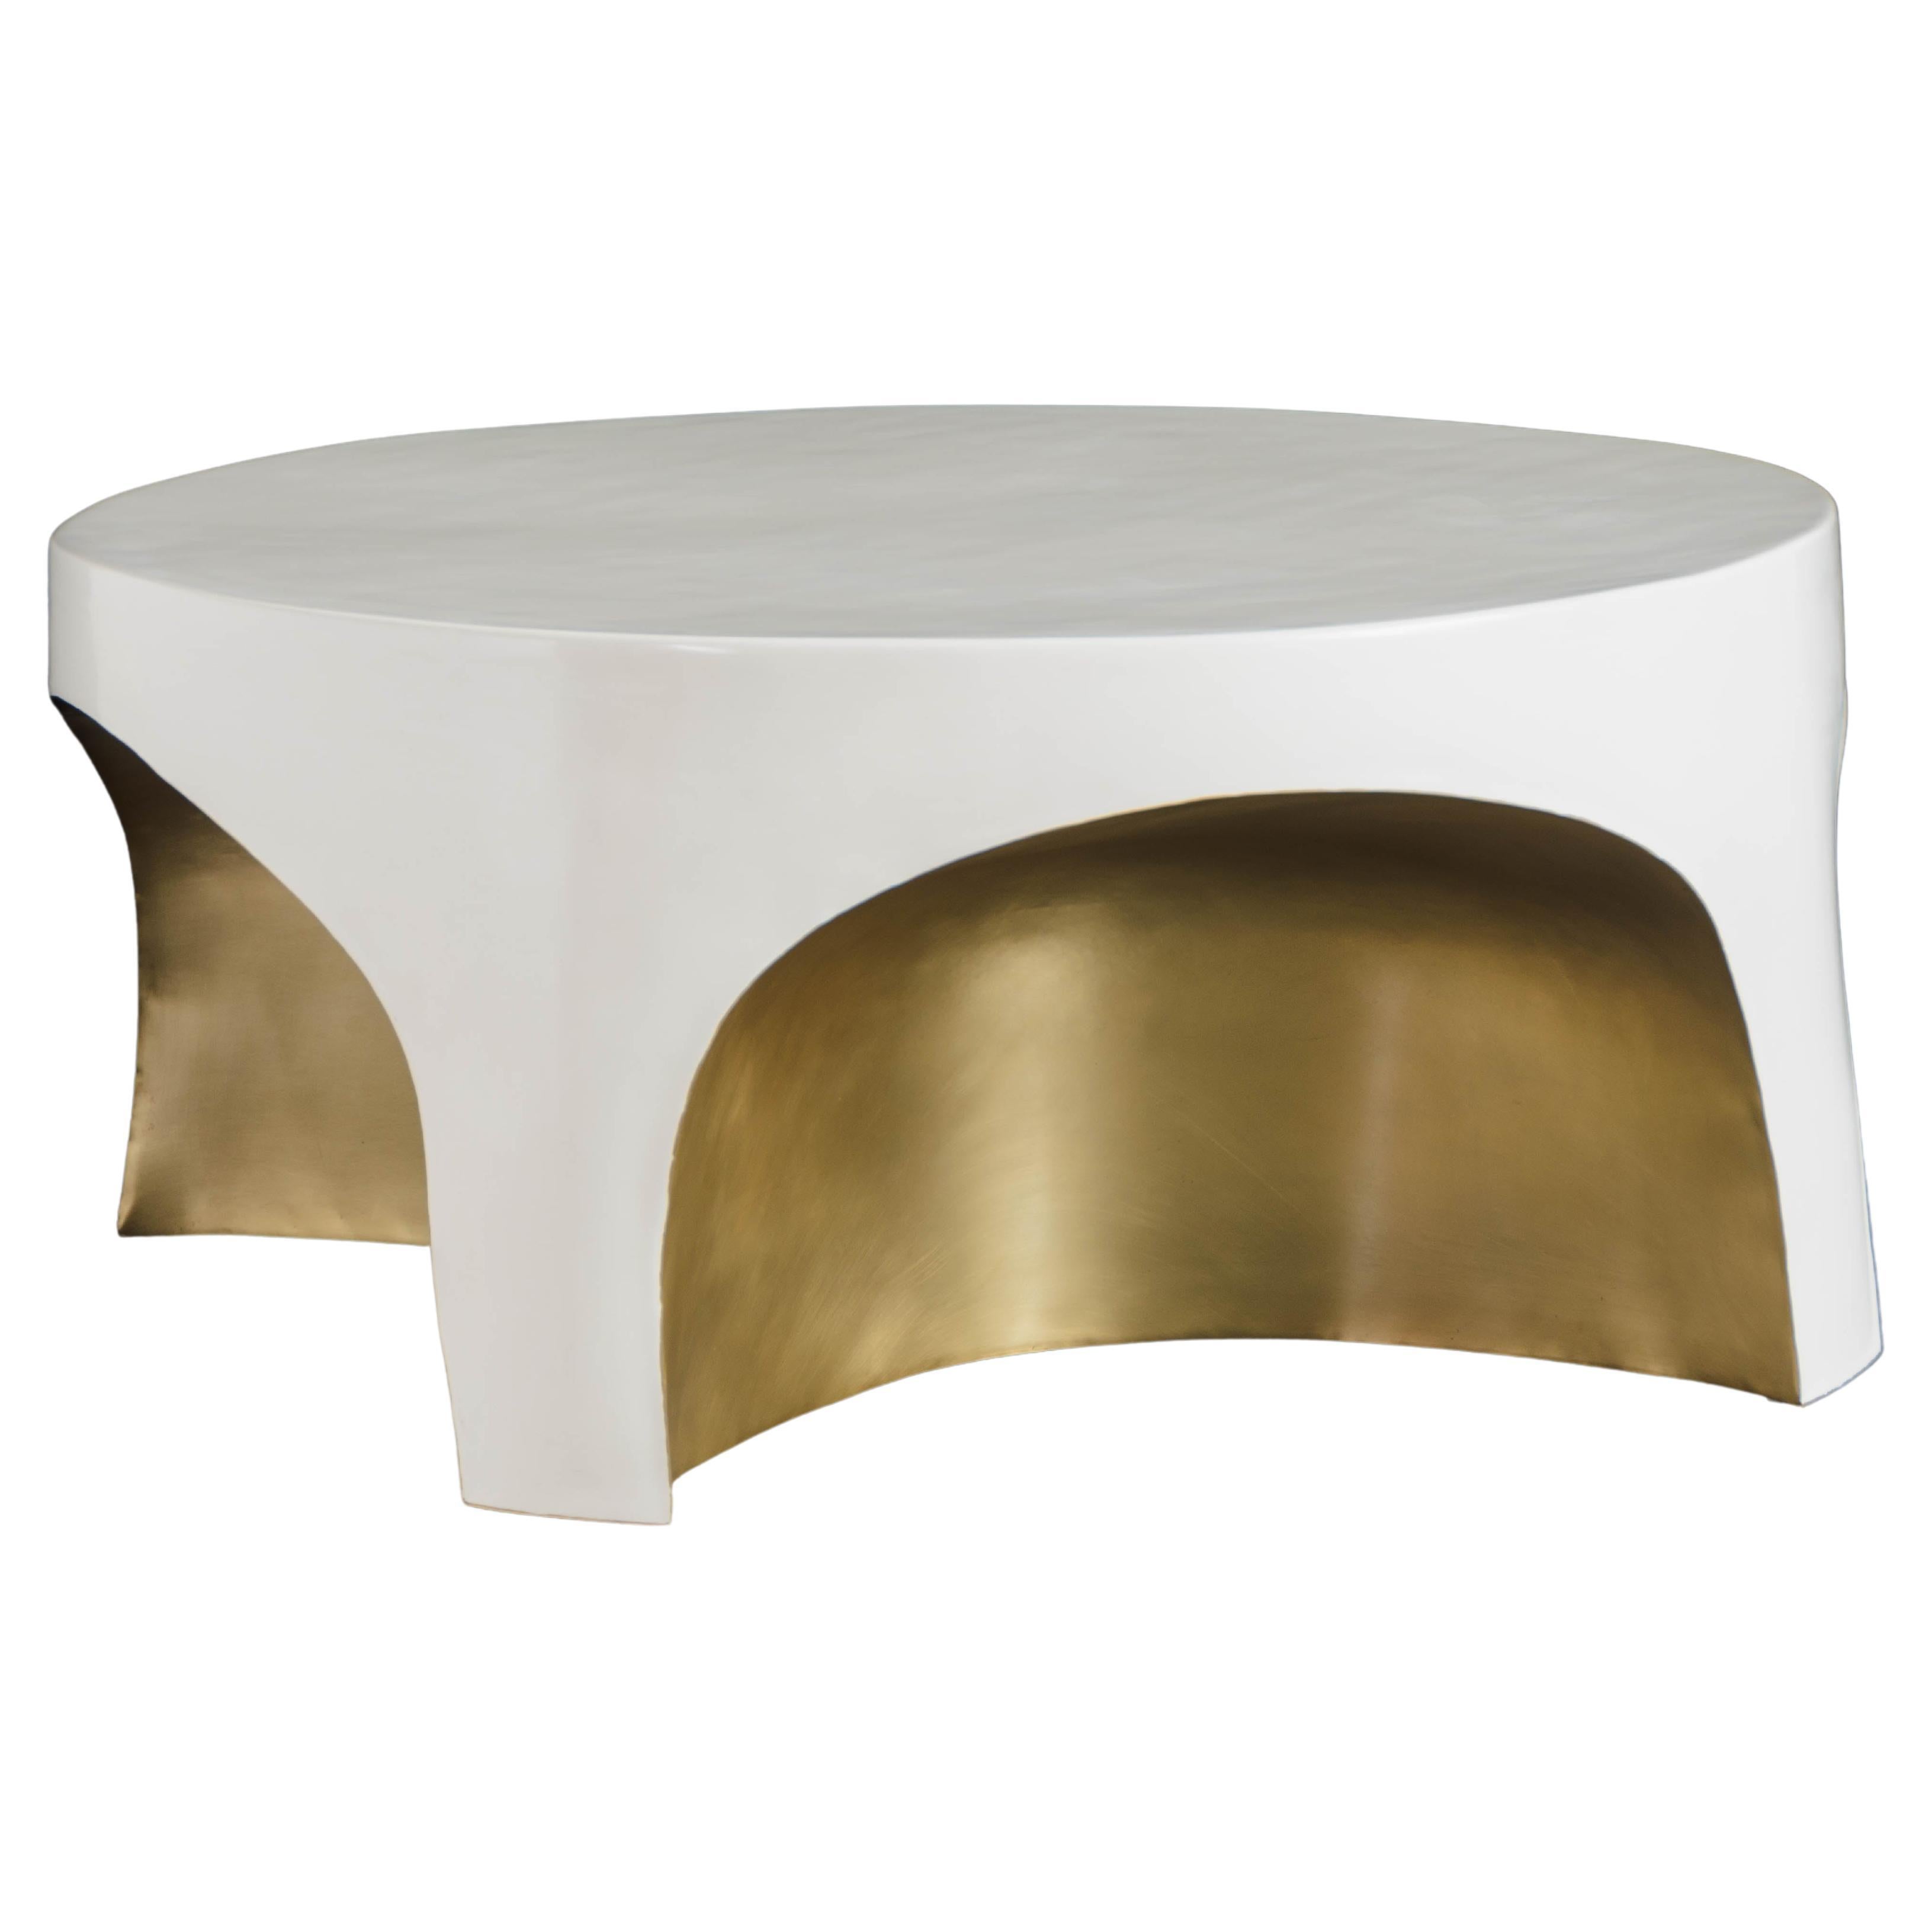 Contemporary Brass Rimmed Curved Table w/ Cream Lacquer by Robert Kuo For Sale